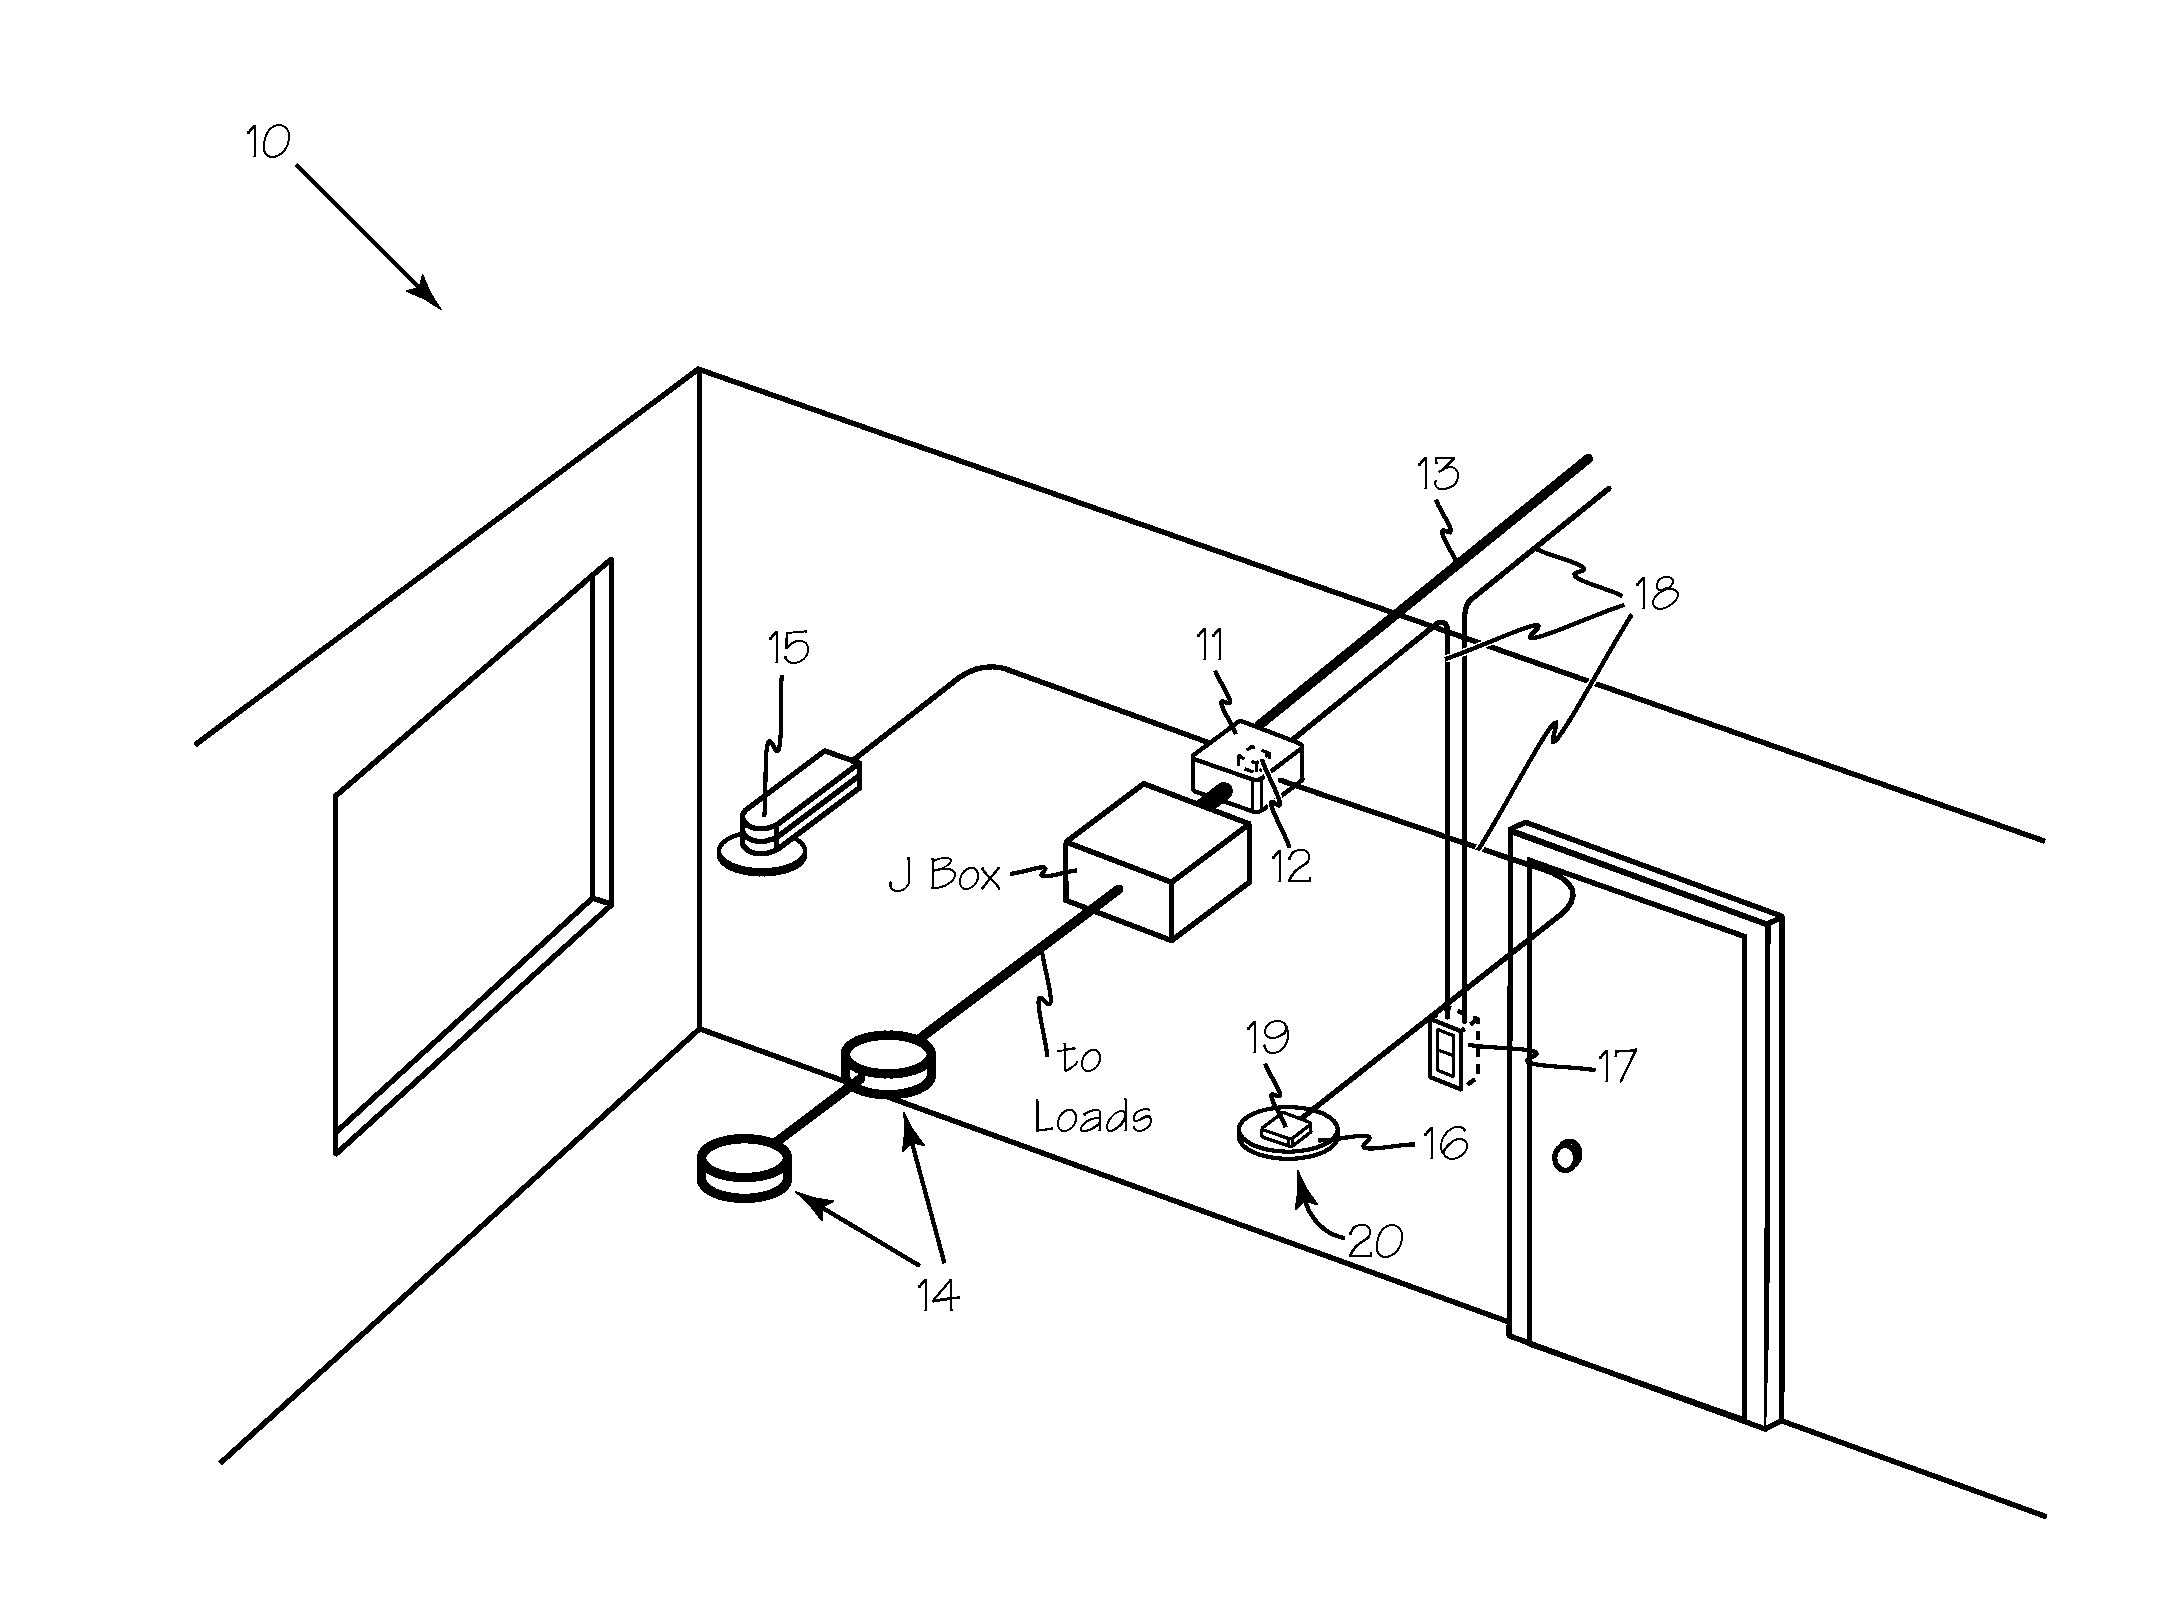 Method and Apparatus for Controlling Light Levels to Save Energy